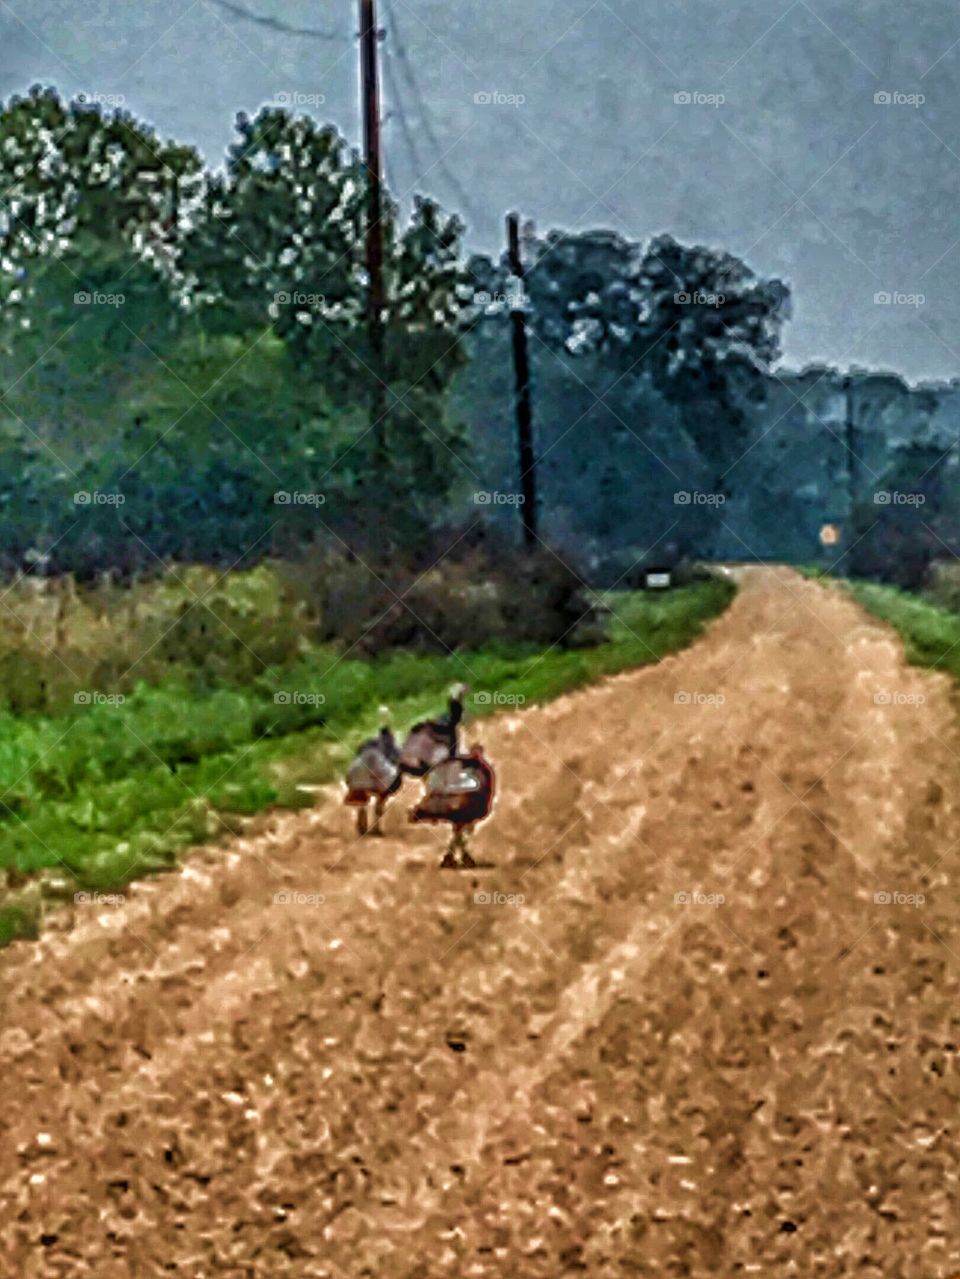 Turkey's out for a stroll 